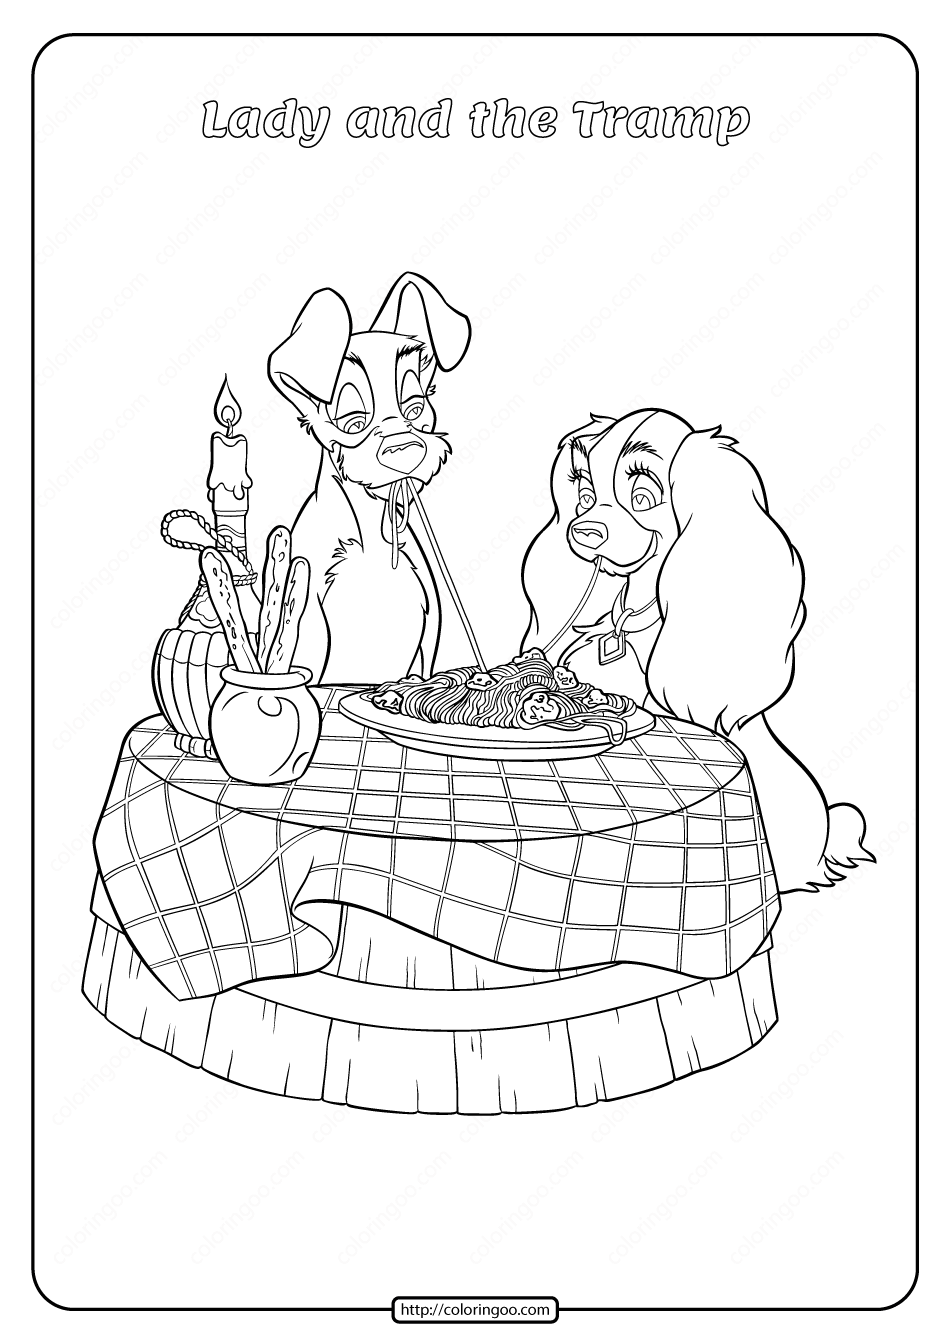 Printable Lady and the Tramp Coloring Page 01